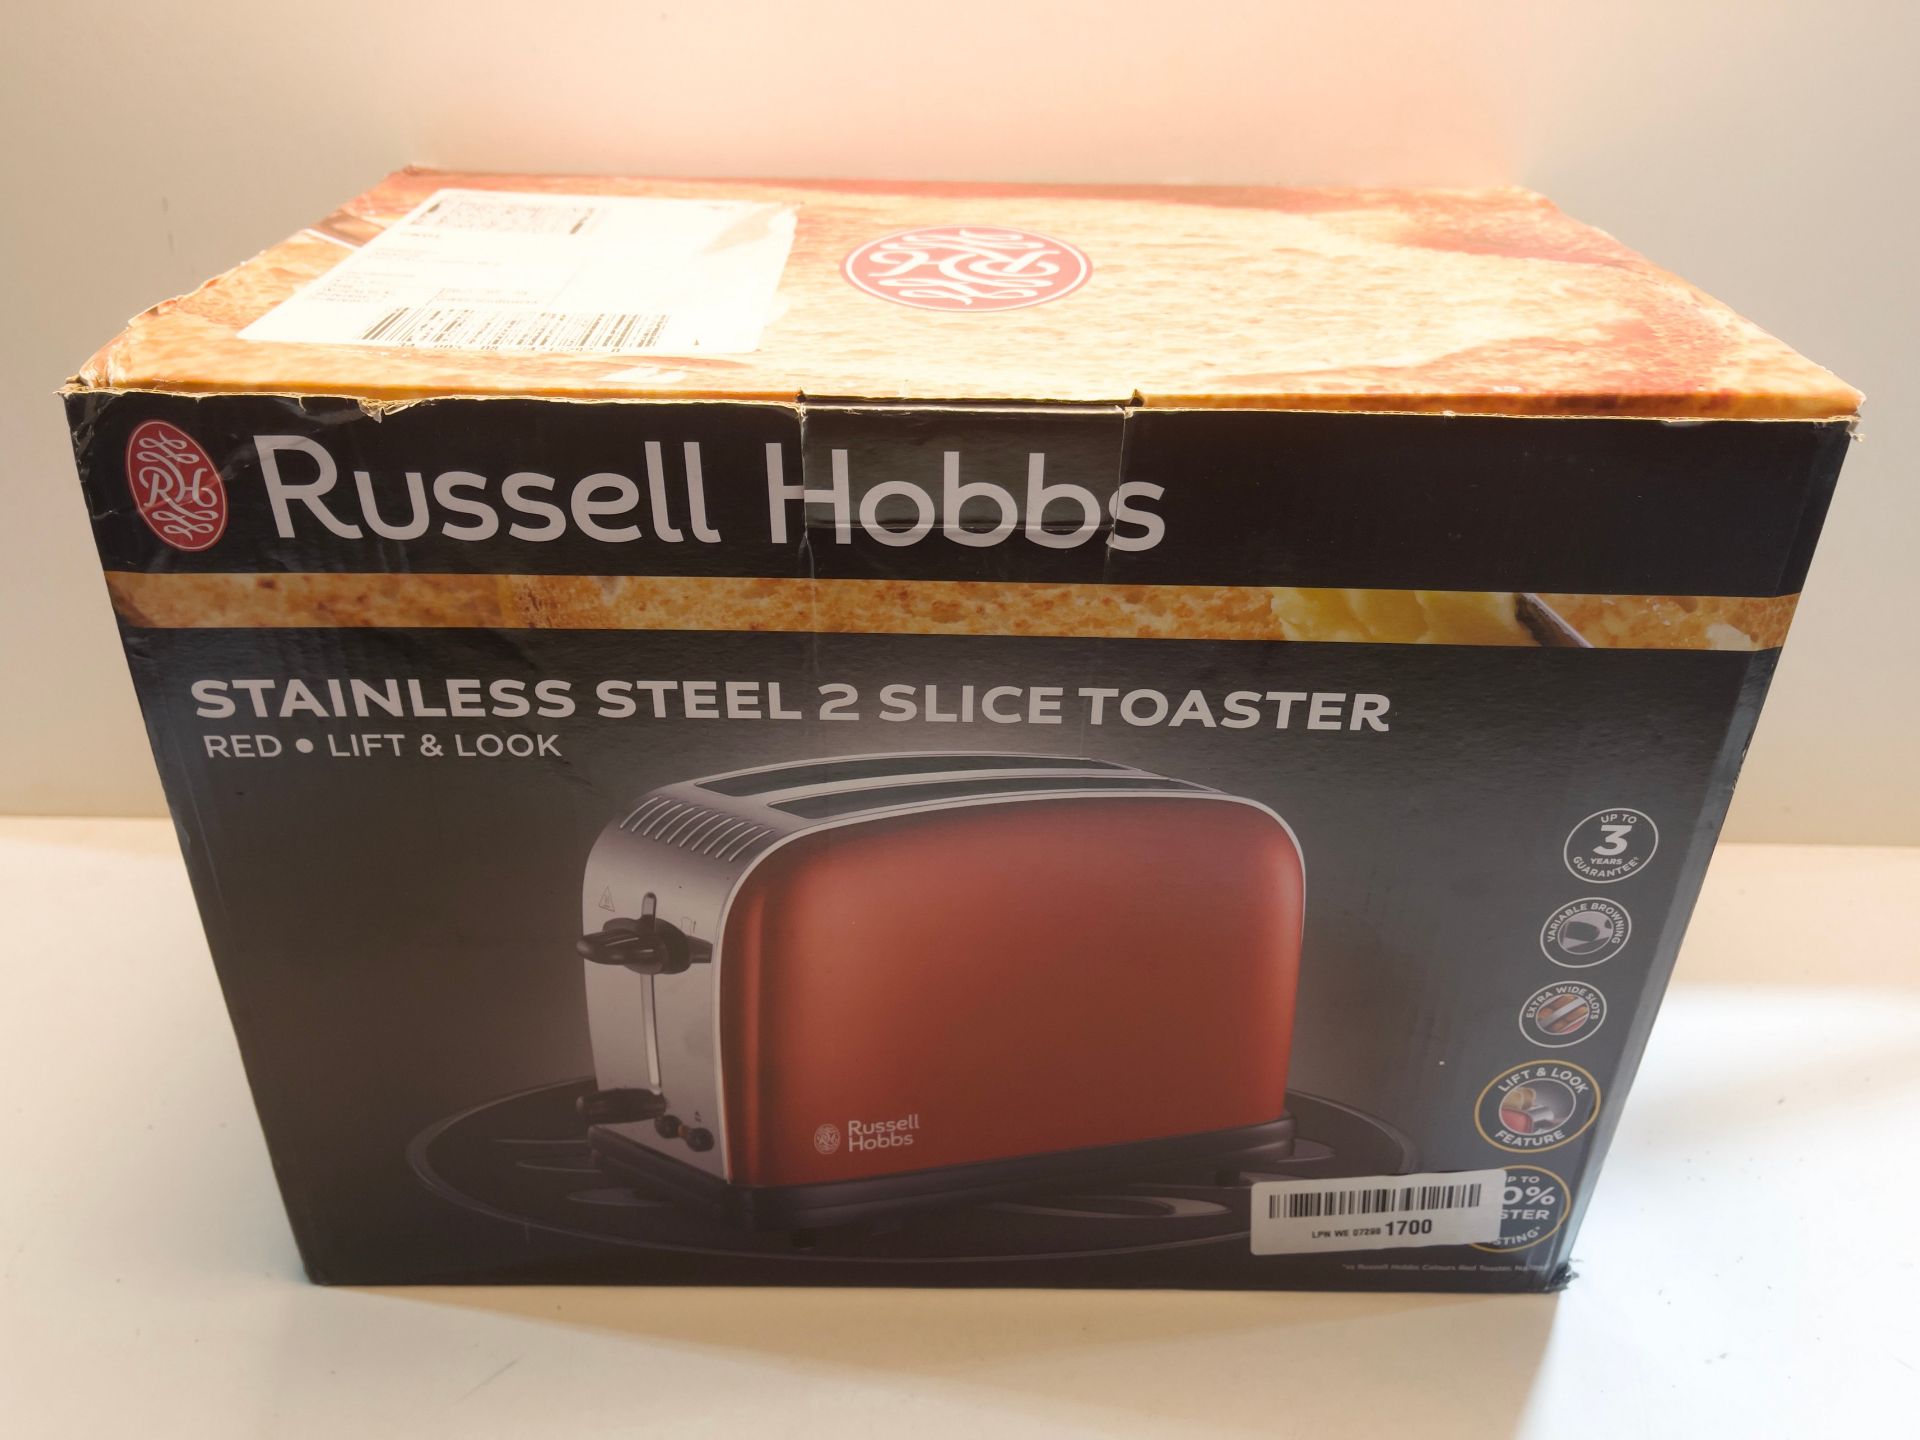 Russell Hobbs 23330 Stainless Steel 2 Slice Toaster, Red Â£34.00Condition ReportAppraisal